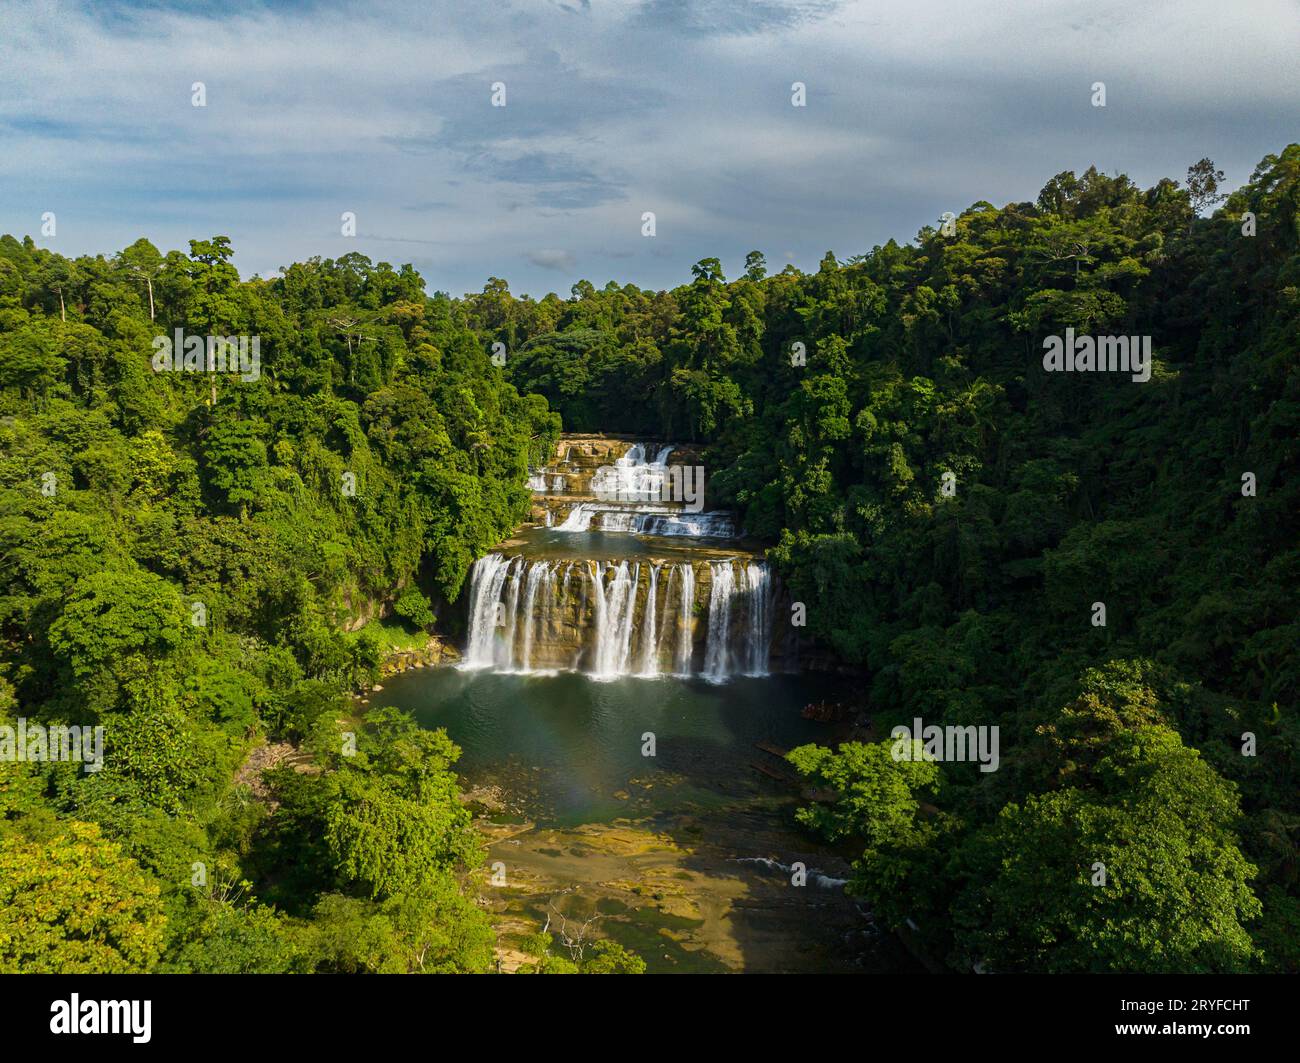 Tropical forest and jungle with waterfalls. Tinuy-an Falls in Bislig, Surigao del Sur. Philippines. Stock Photo